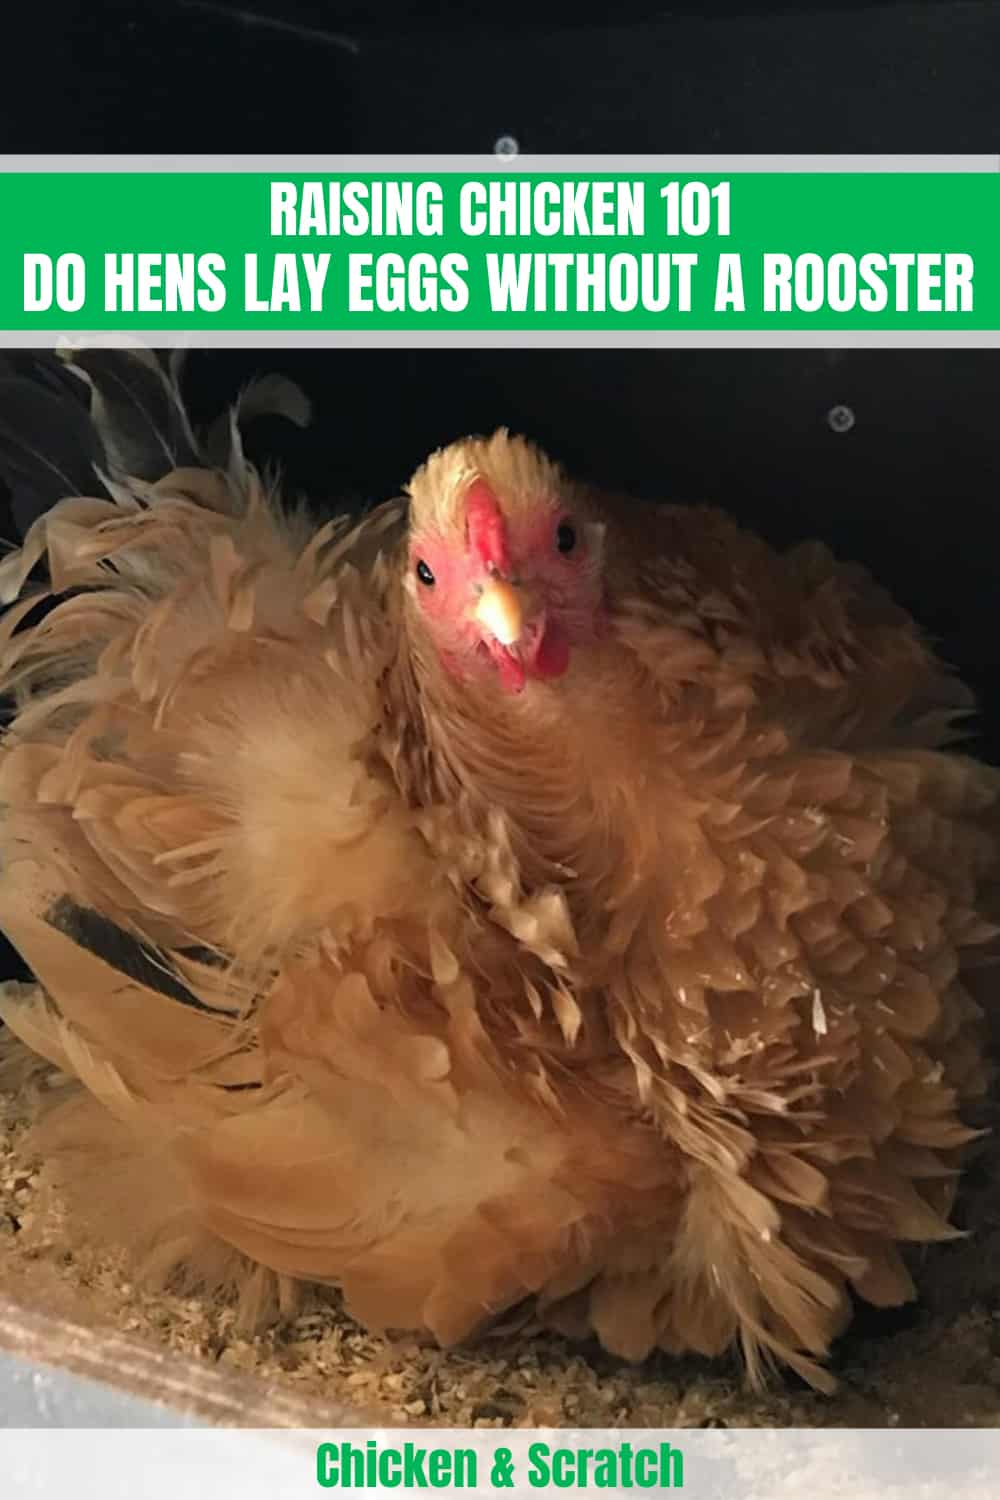 how do chickens lay eggs without a rooster